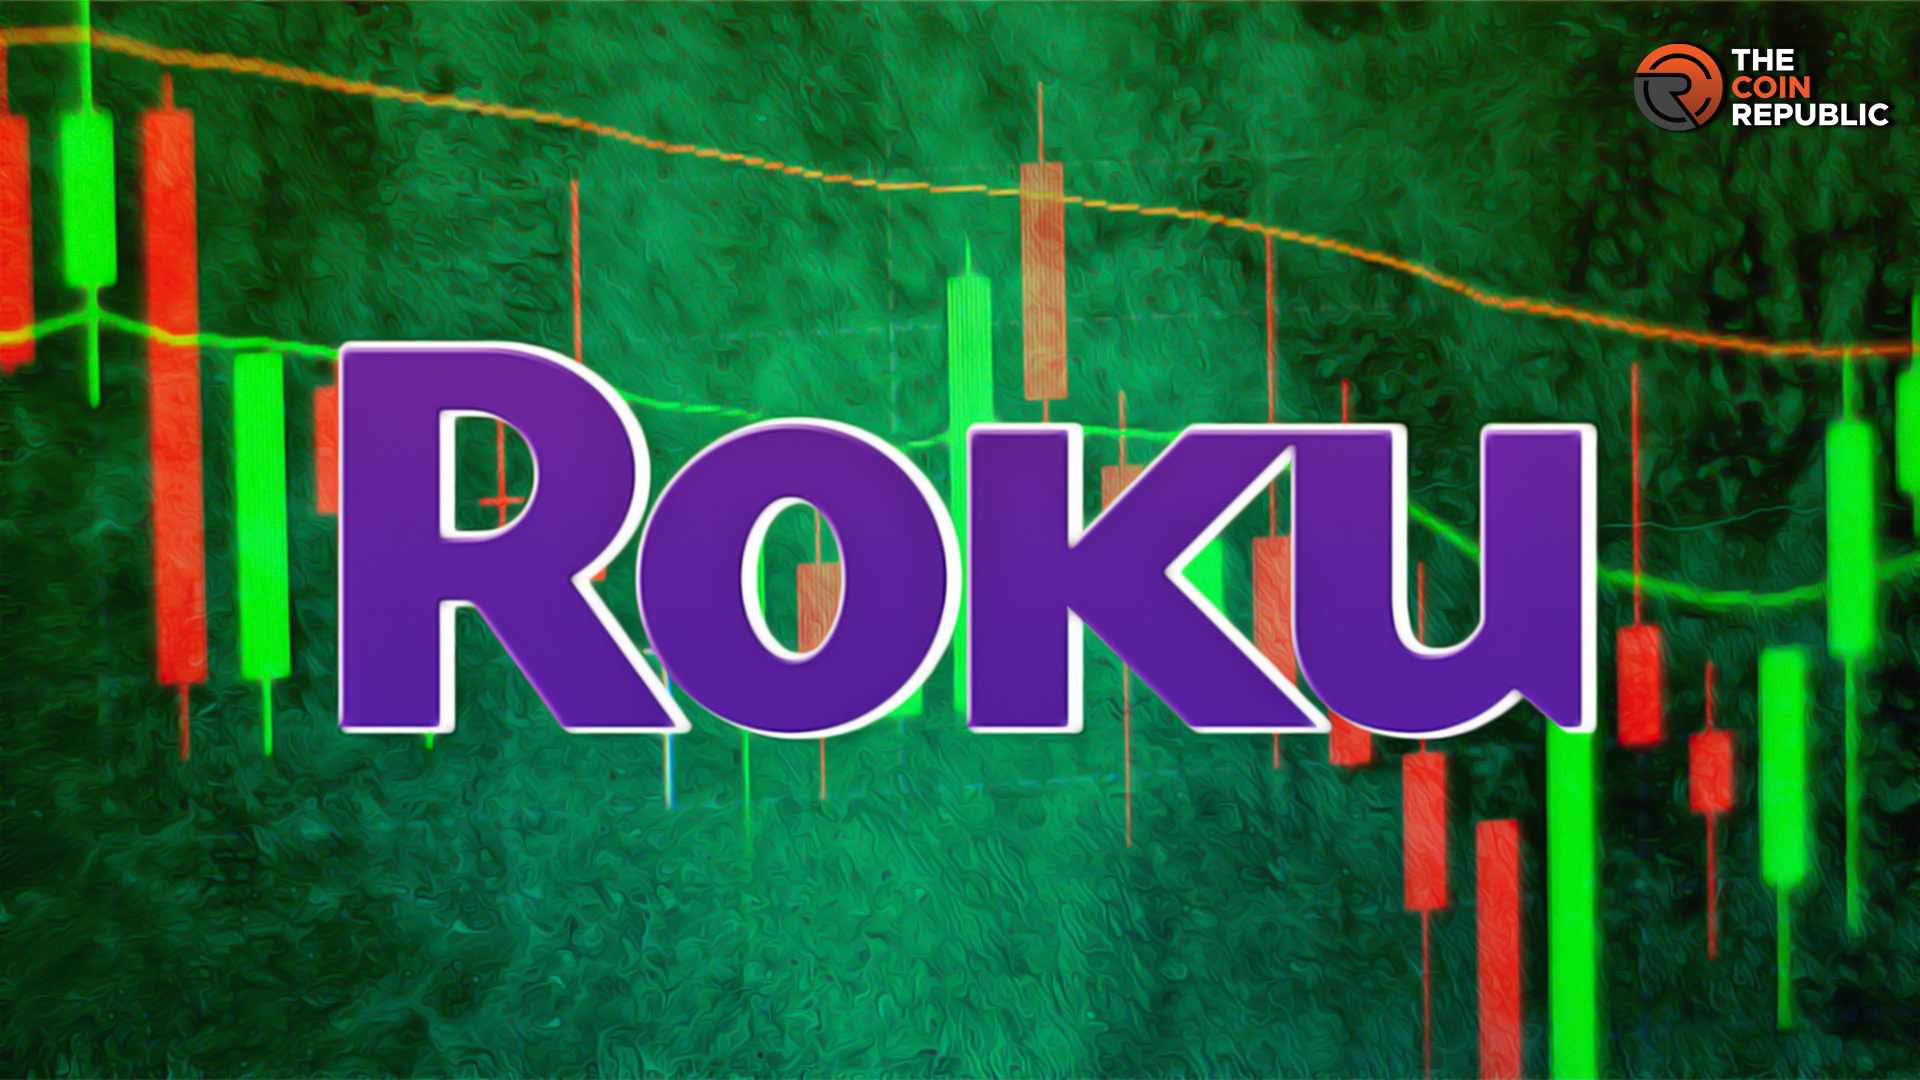 ROKU Stock Price Below $70; Will the Correction Continue?